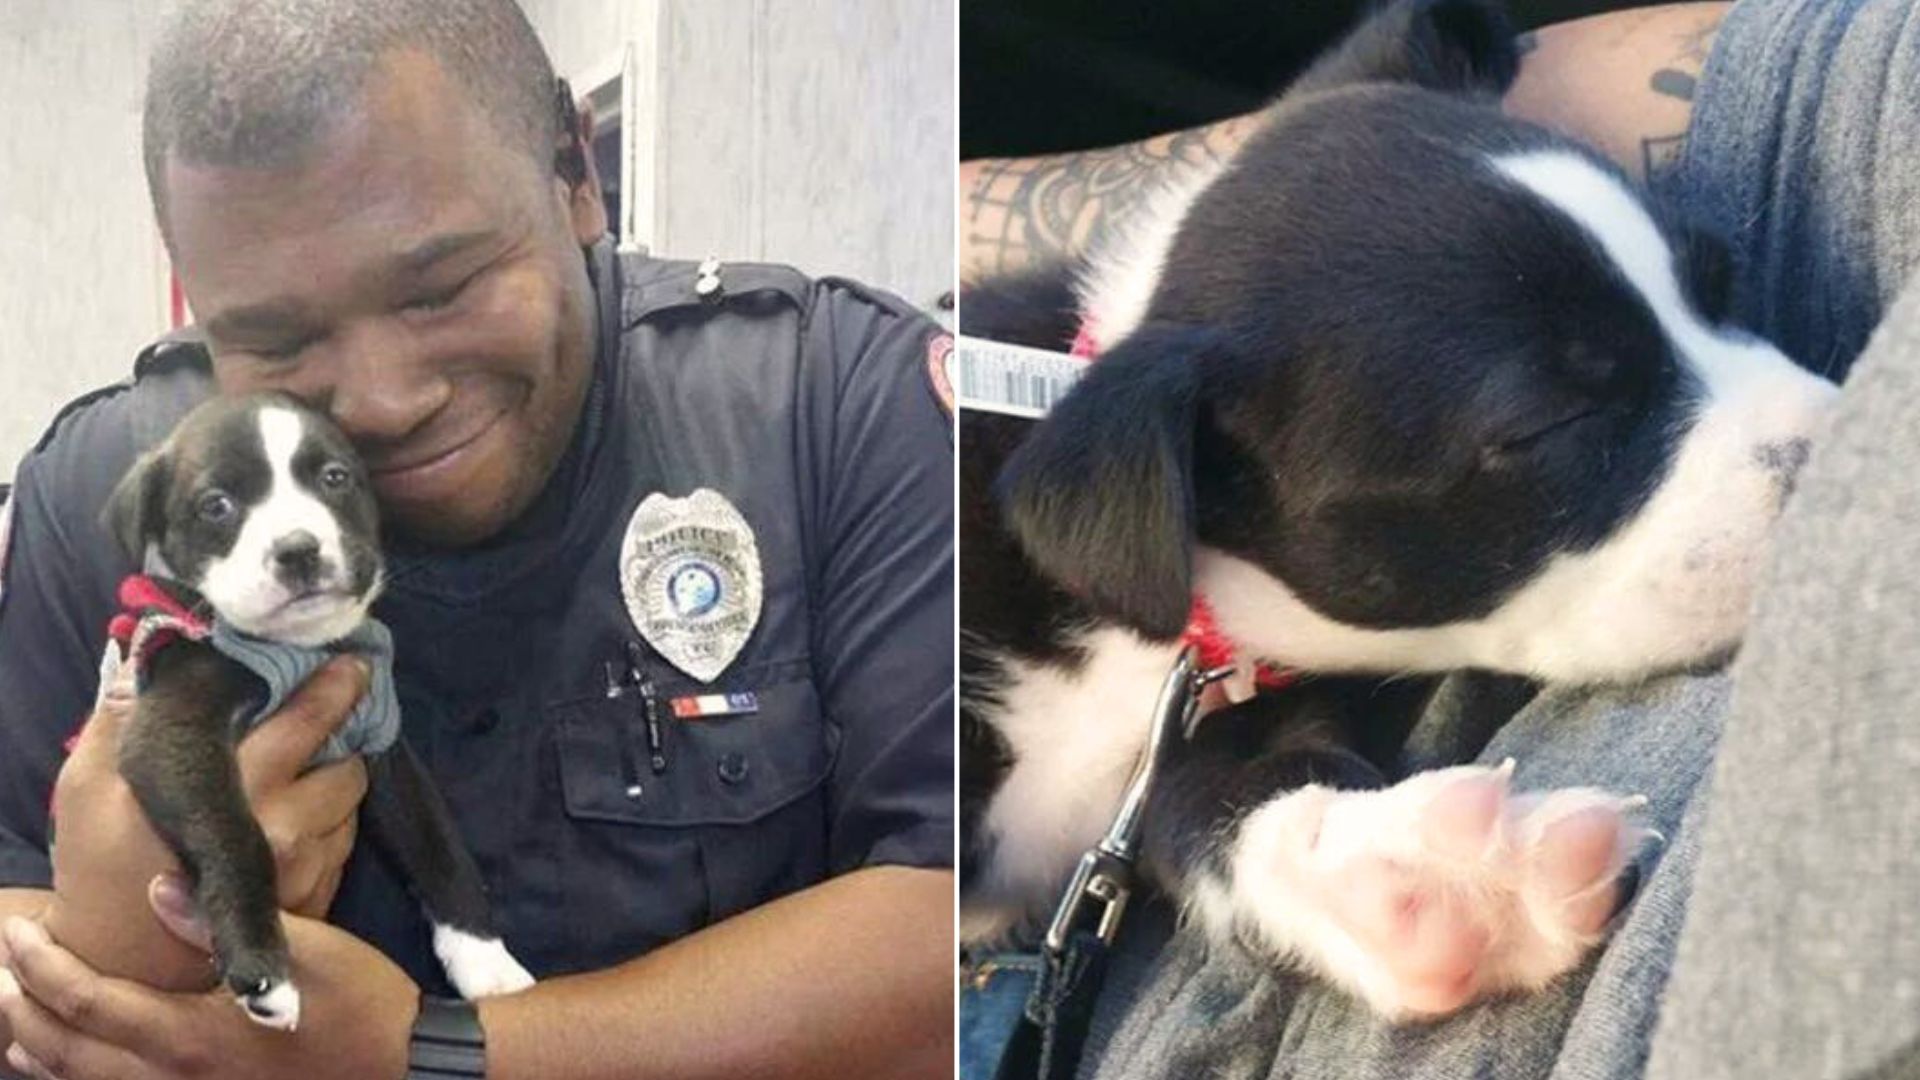 Police Officer Responds To Call At Animal Shelter, Ends Up “Arresting” The Cutest Puppy